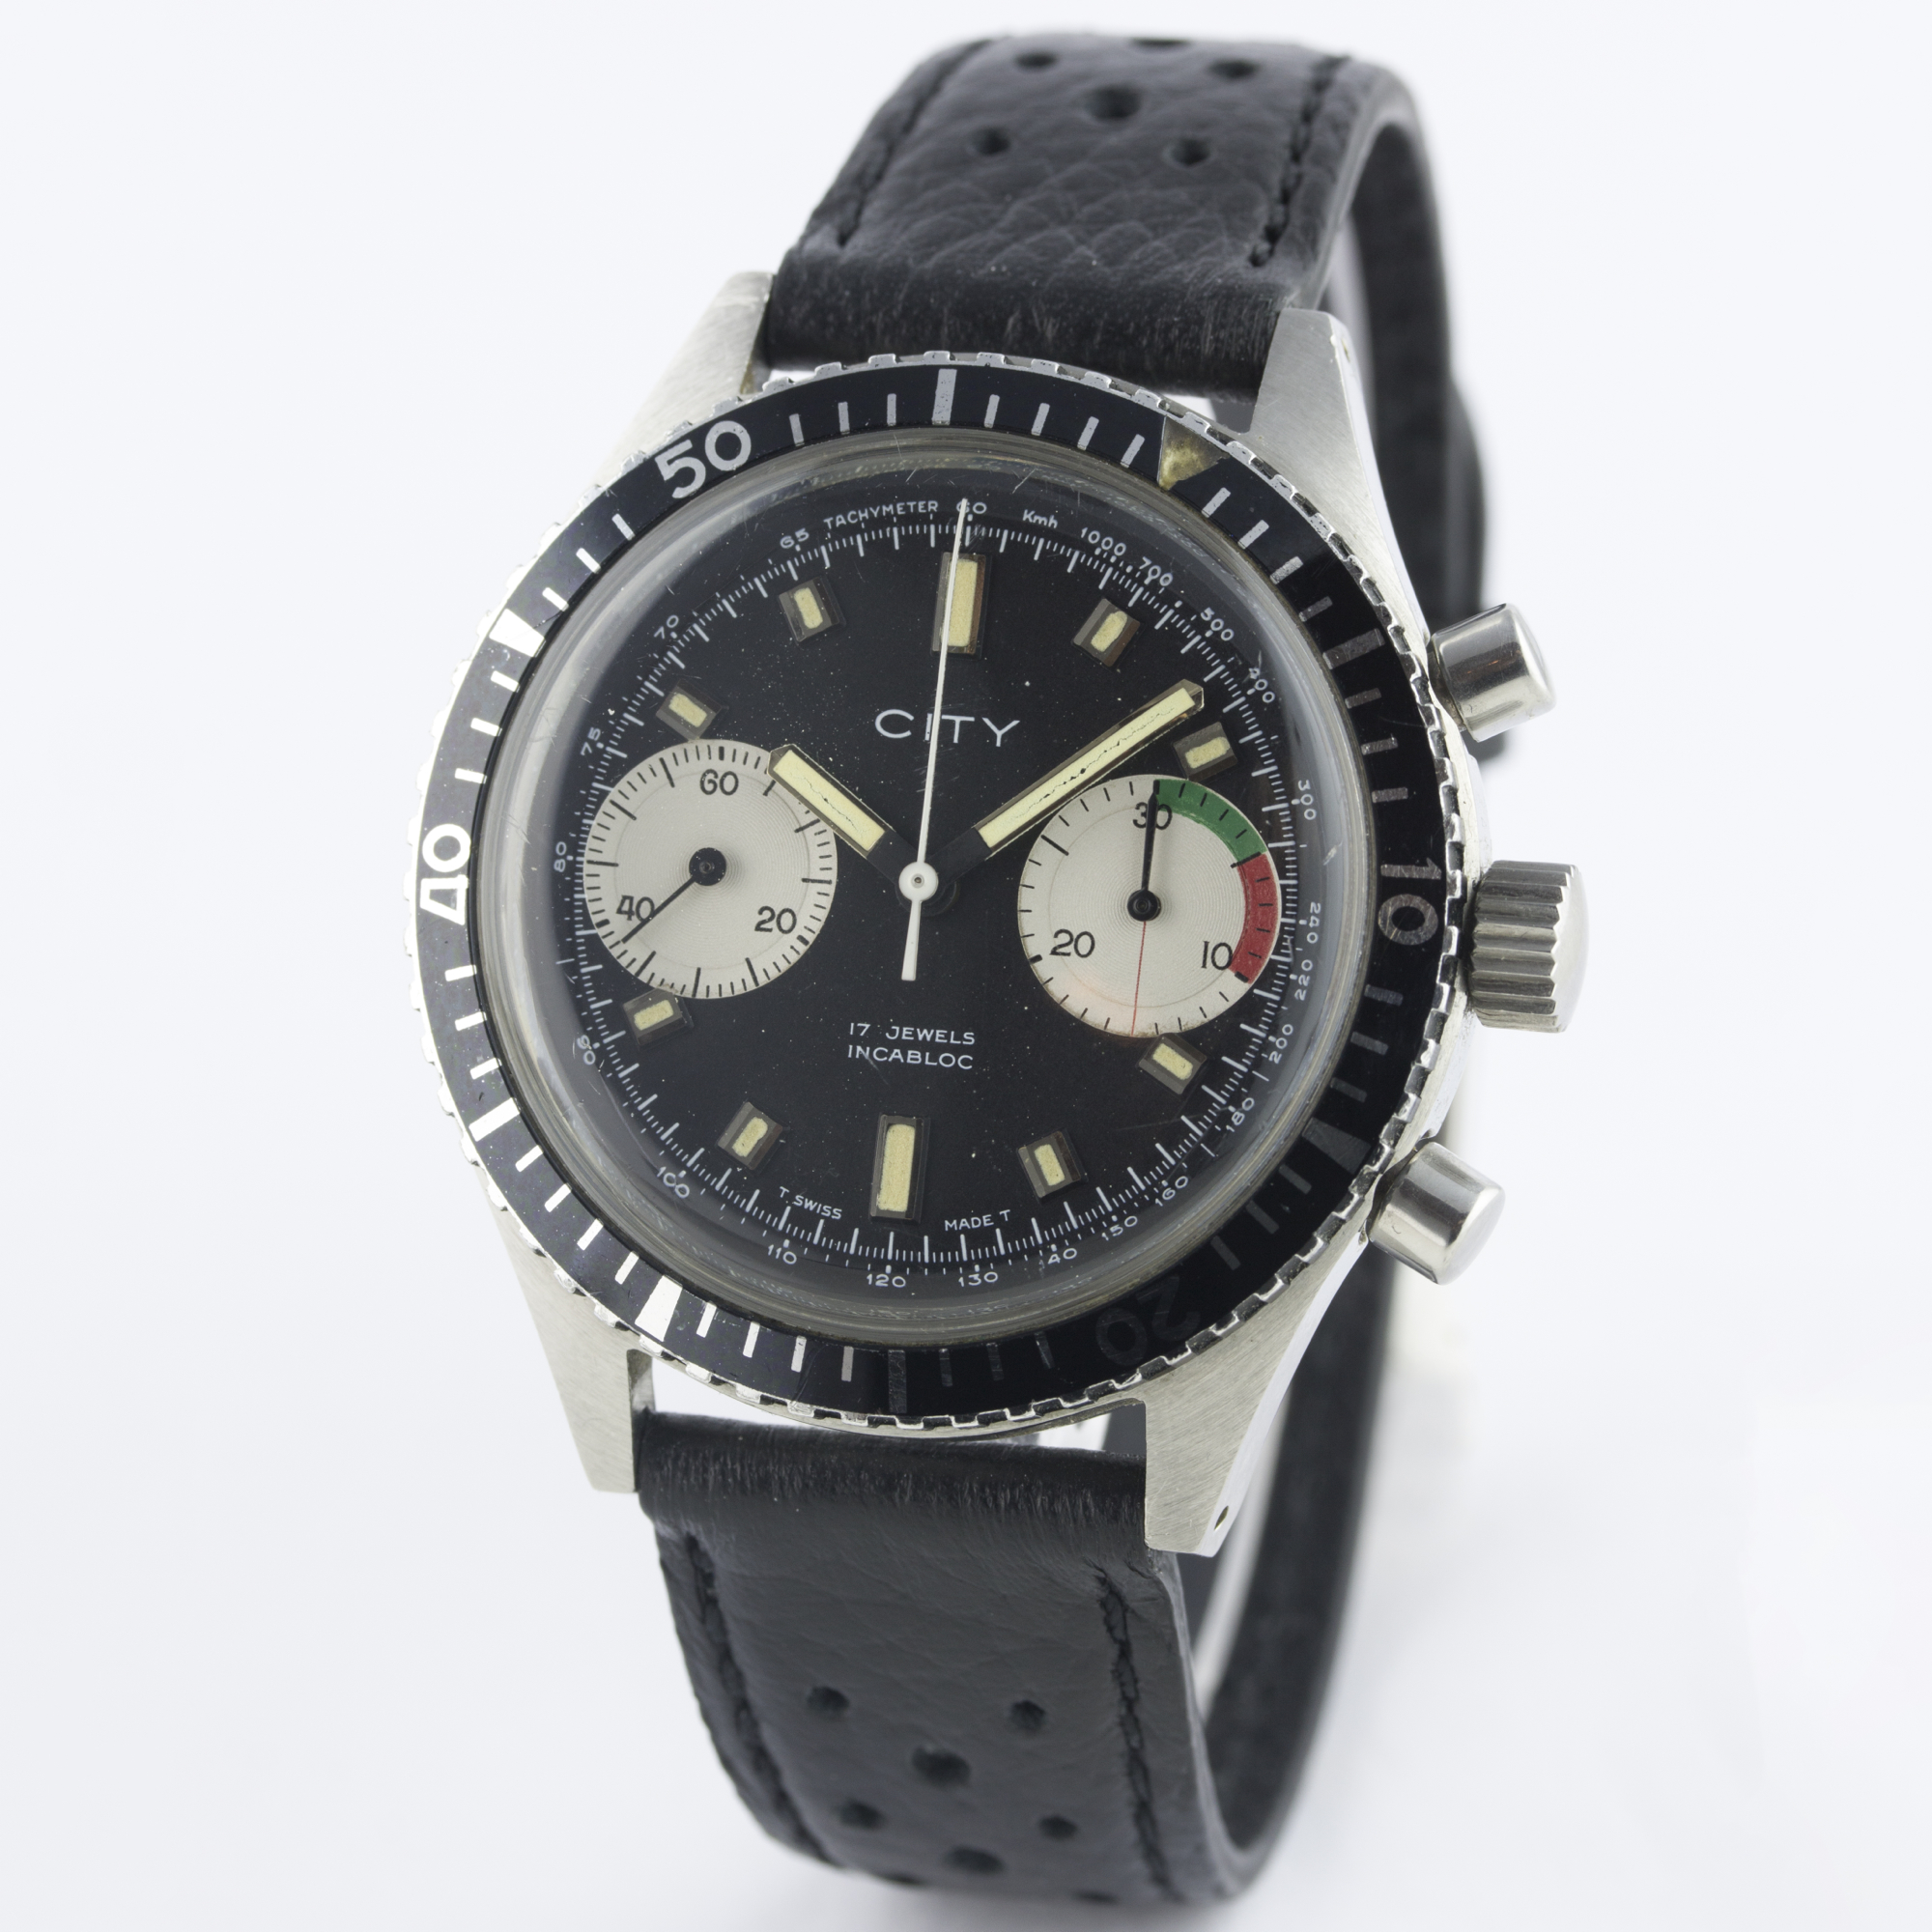 A GENTLEMAN’S STAINLESS STEEL CITY CHRONOGRAPH WRIST WATCH CIRCA 1970s D: Black dial with luminous - Image 4 of 10